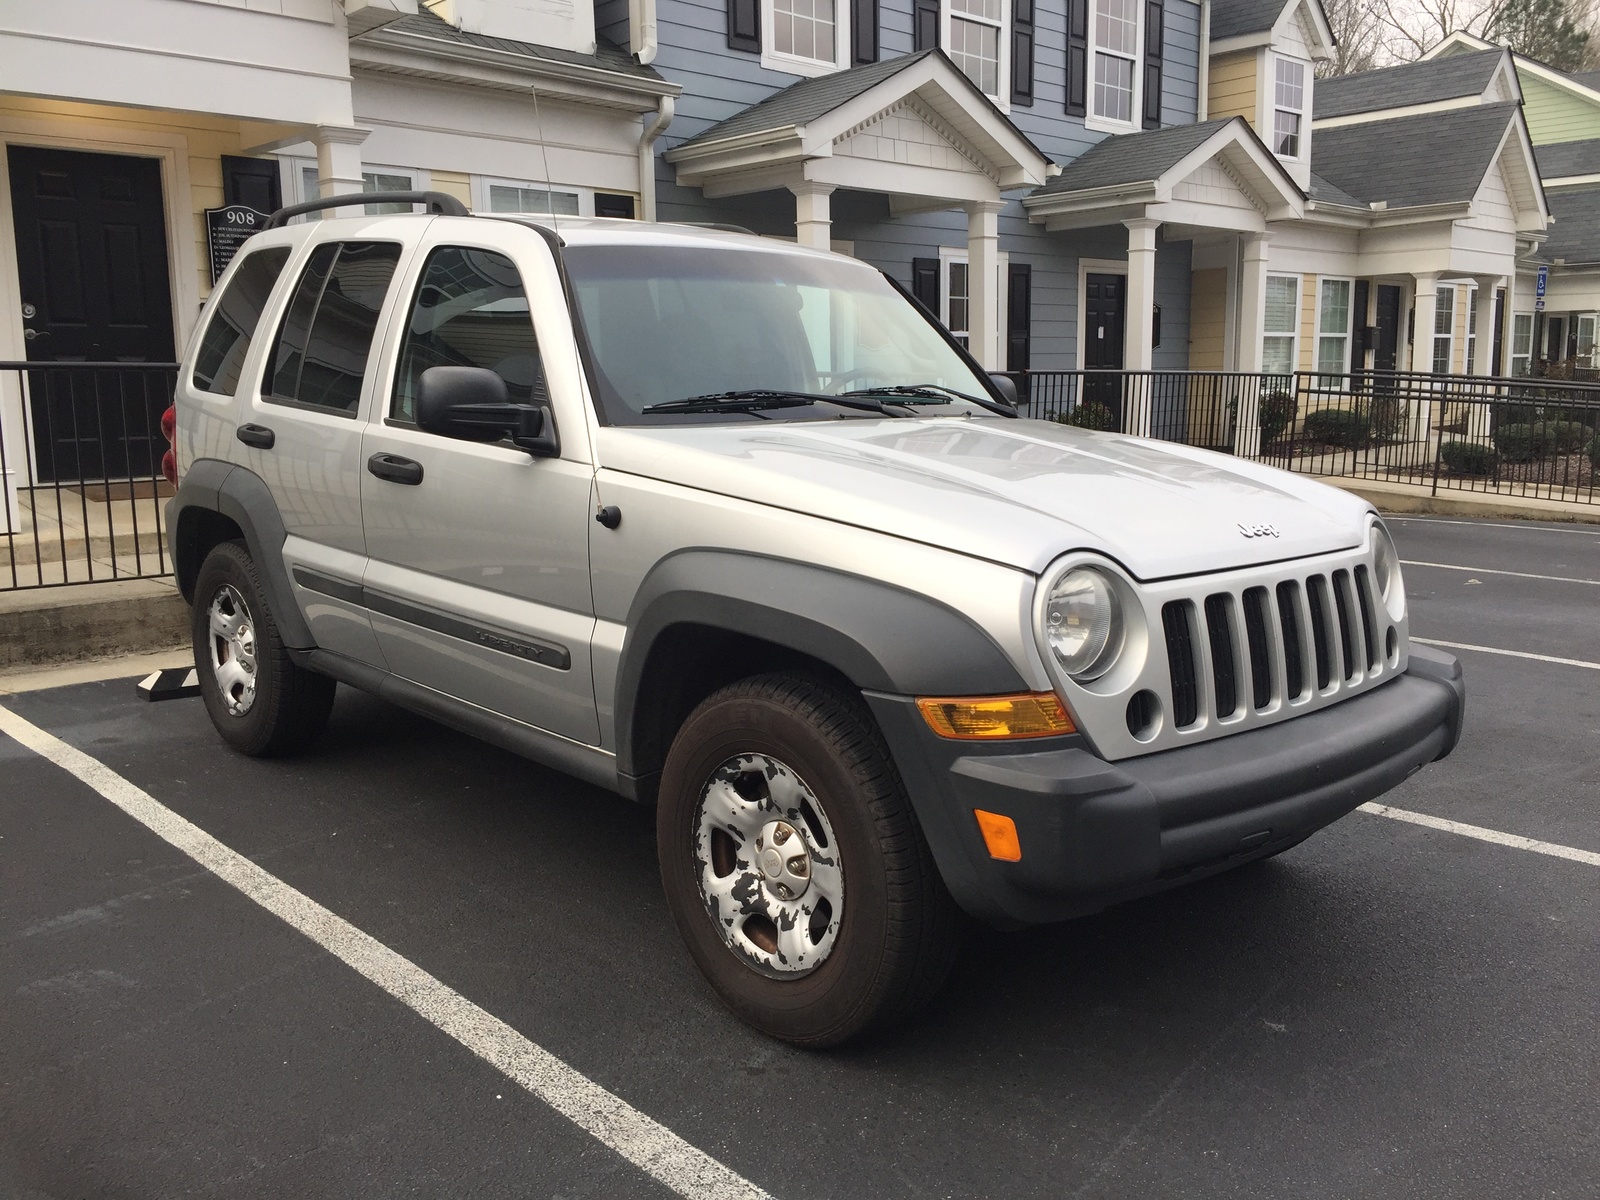 2006 Jeep Liberty: Prices, Reviews & Pictures - CarGurus